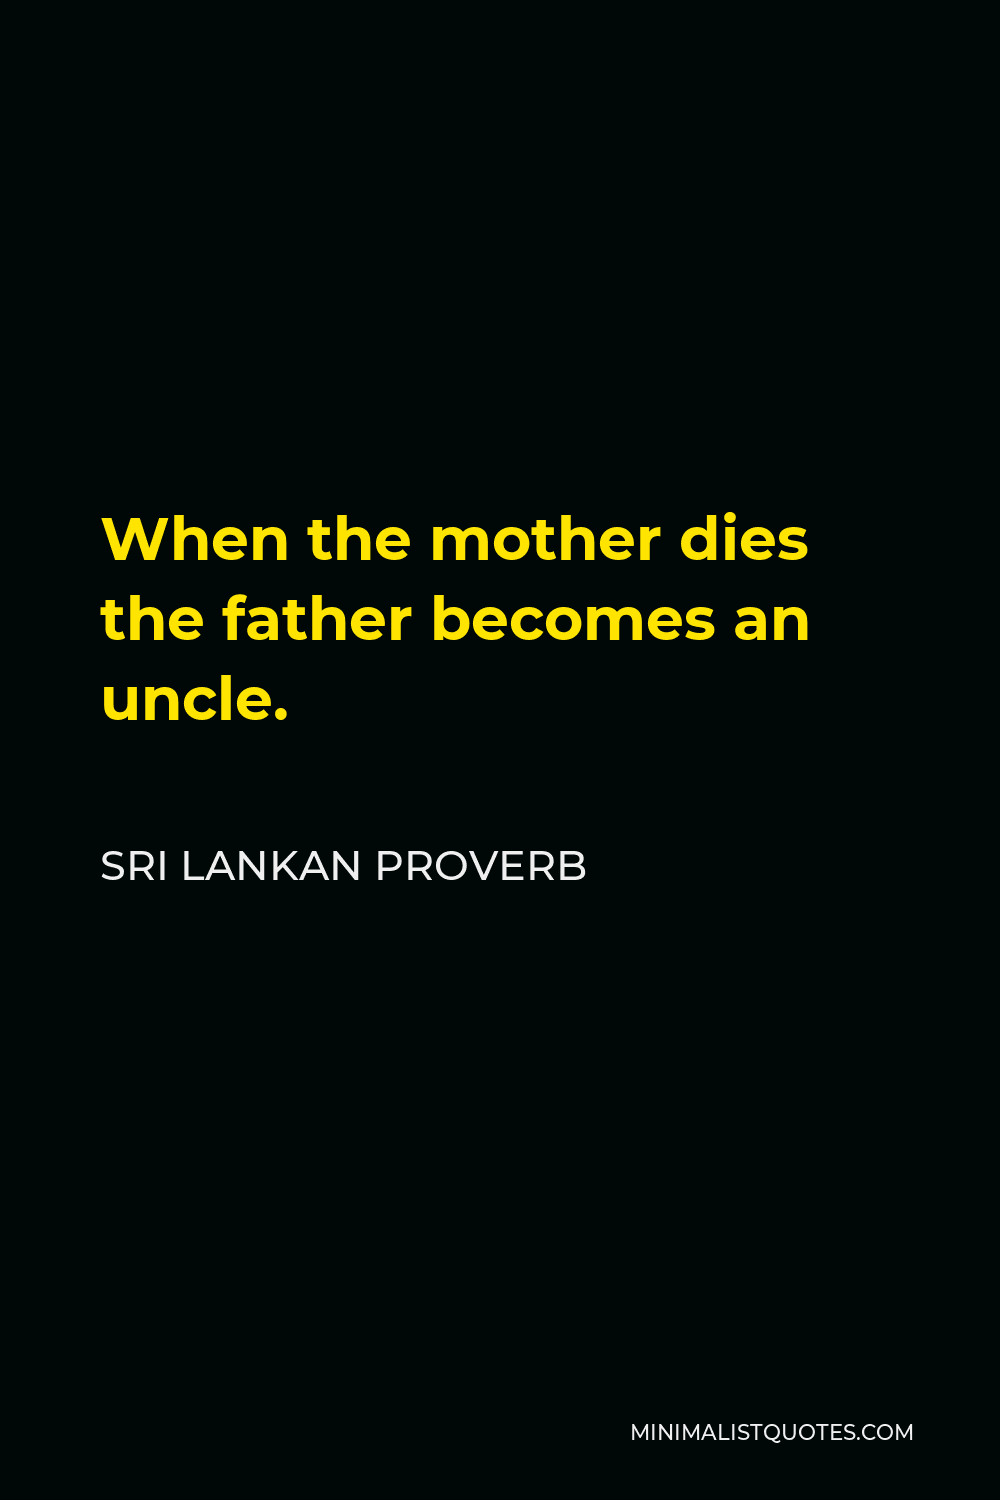 Sri Lankan Proverb Quote - When the mother dies the father becomes an uncle.